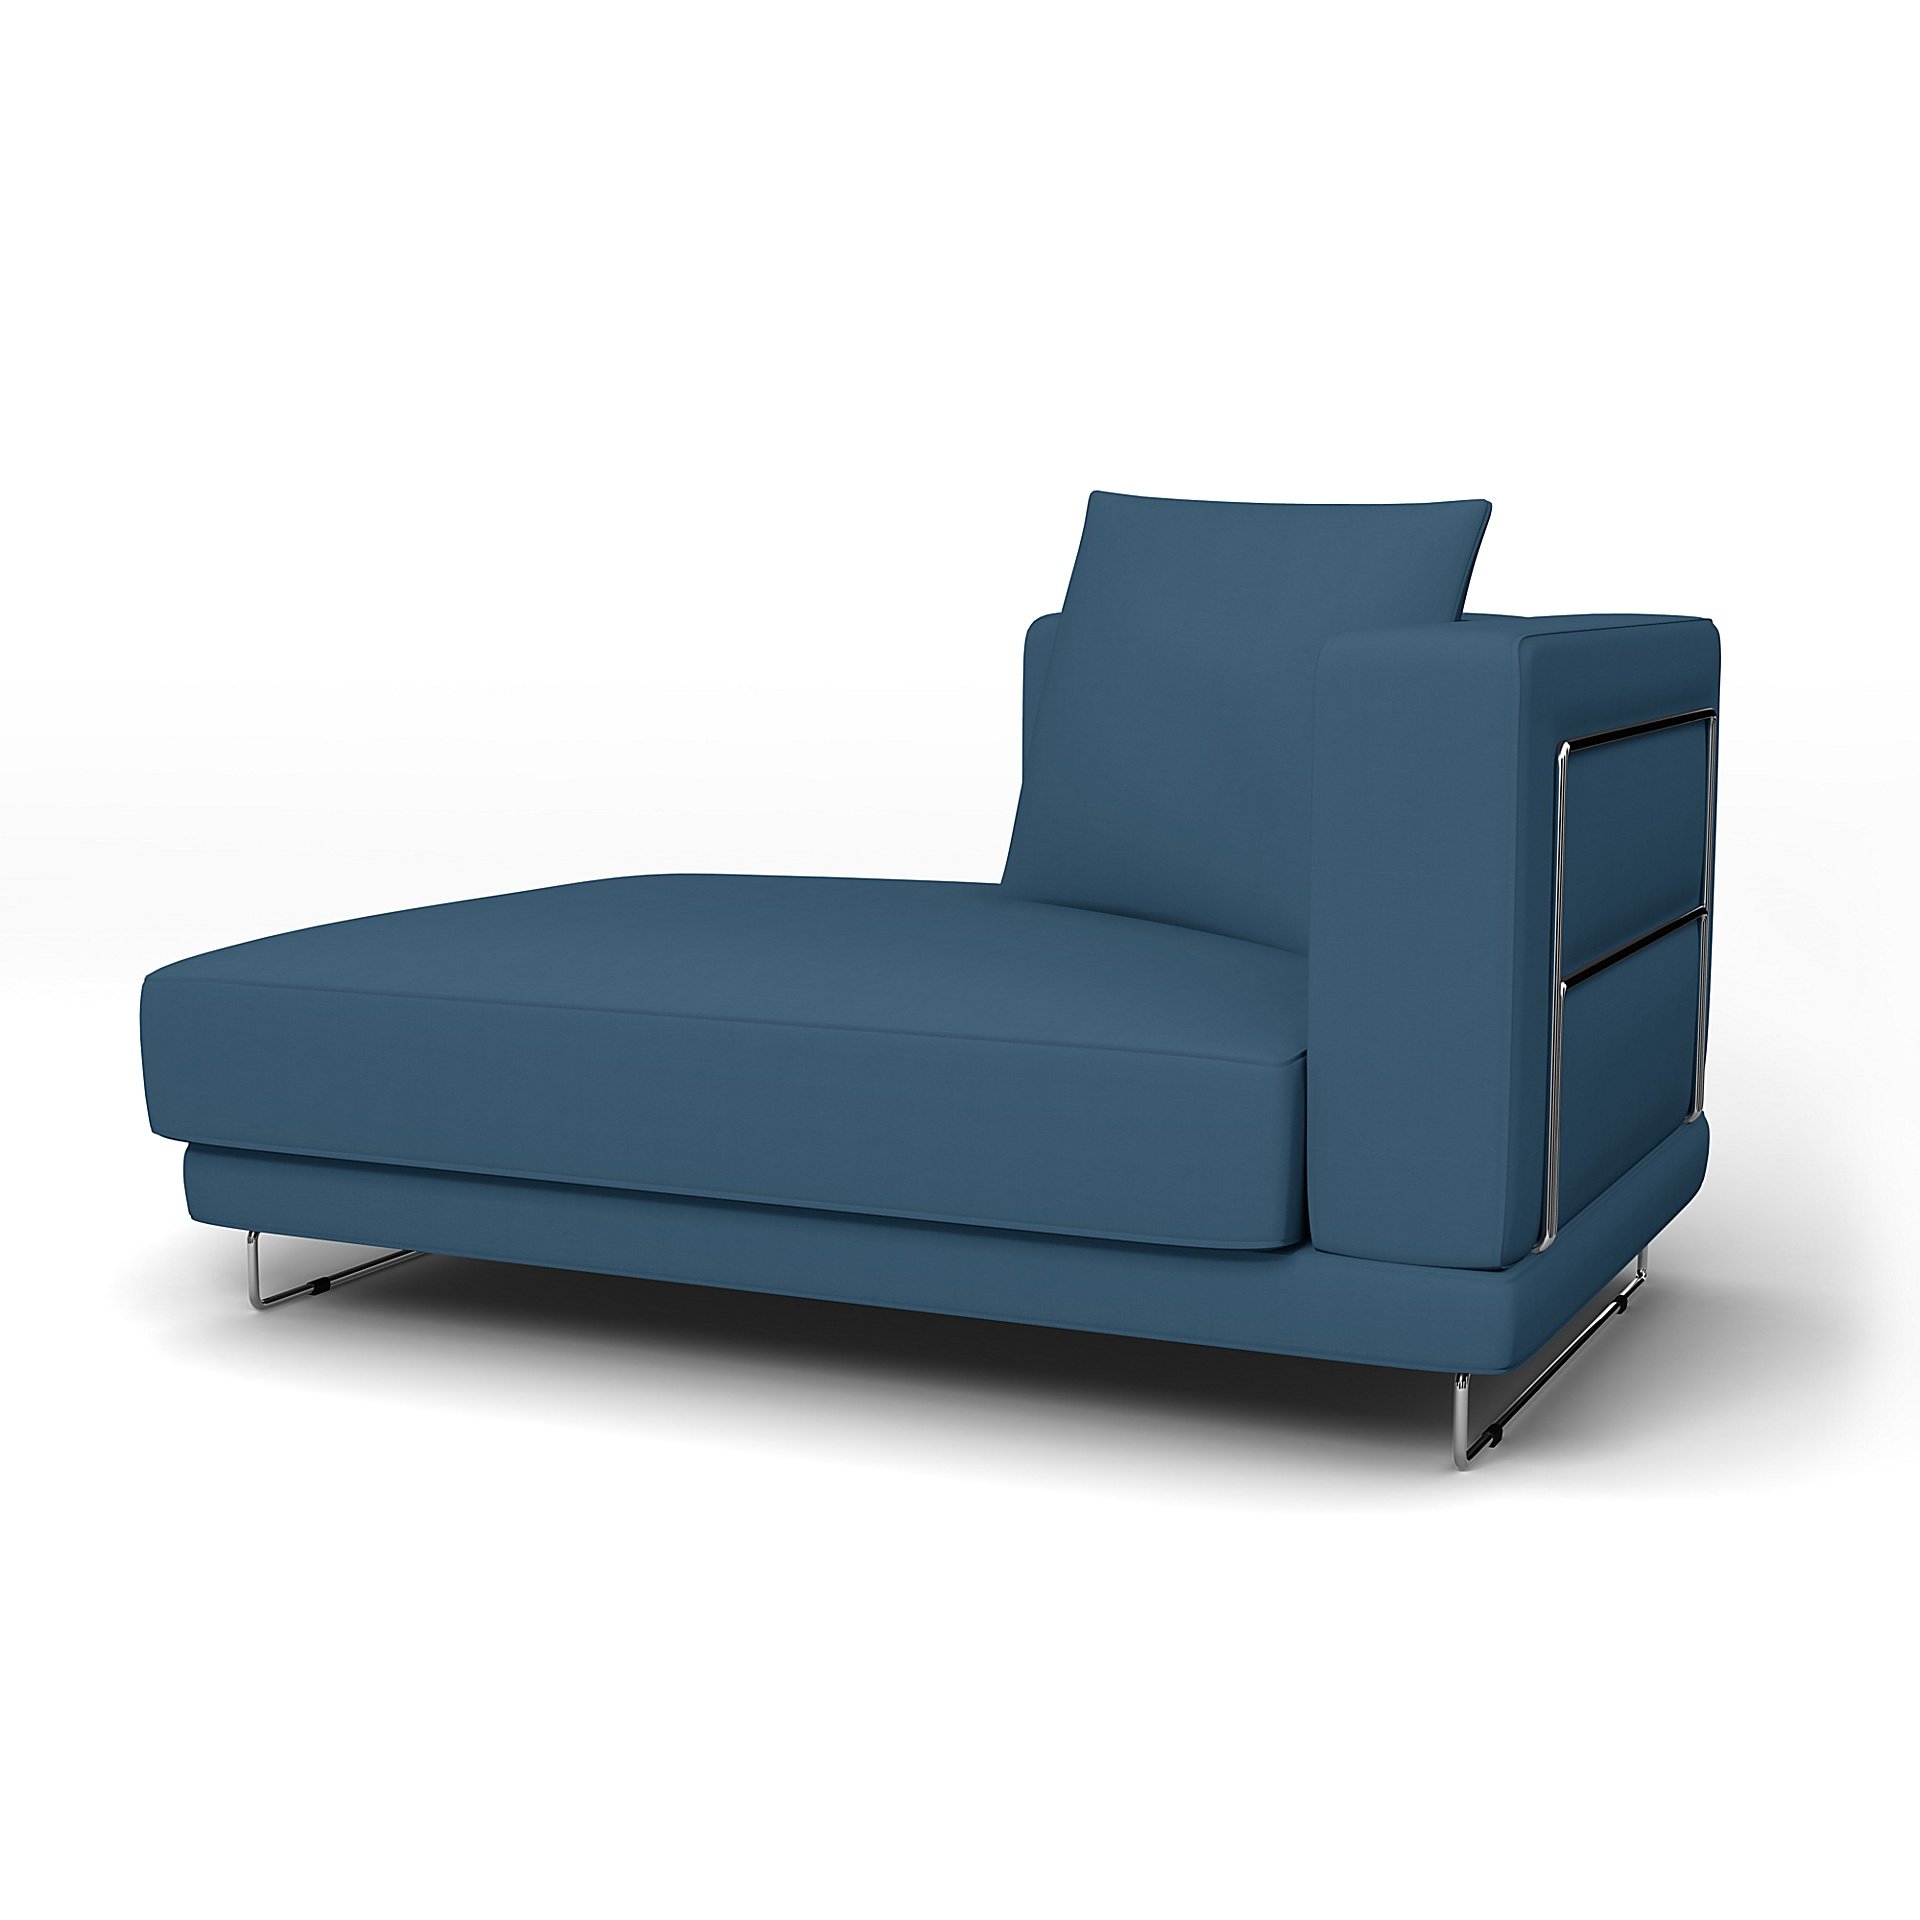 IKEA - Tylosand Chaise with Left Armrest Cover, Real Teal, Cotton - Bemz